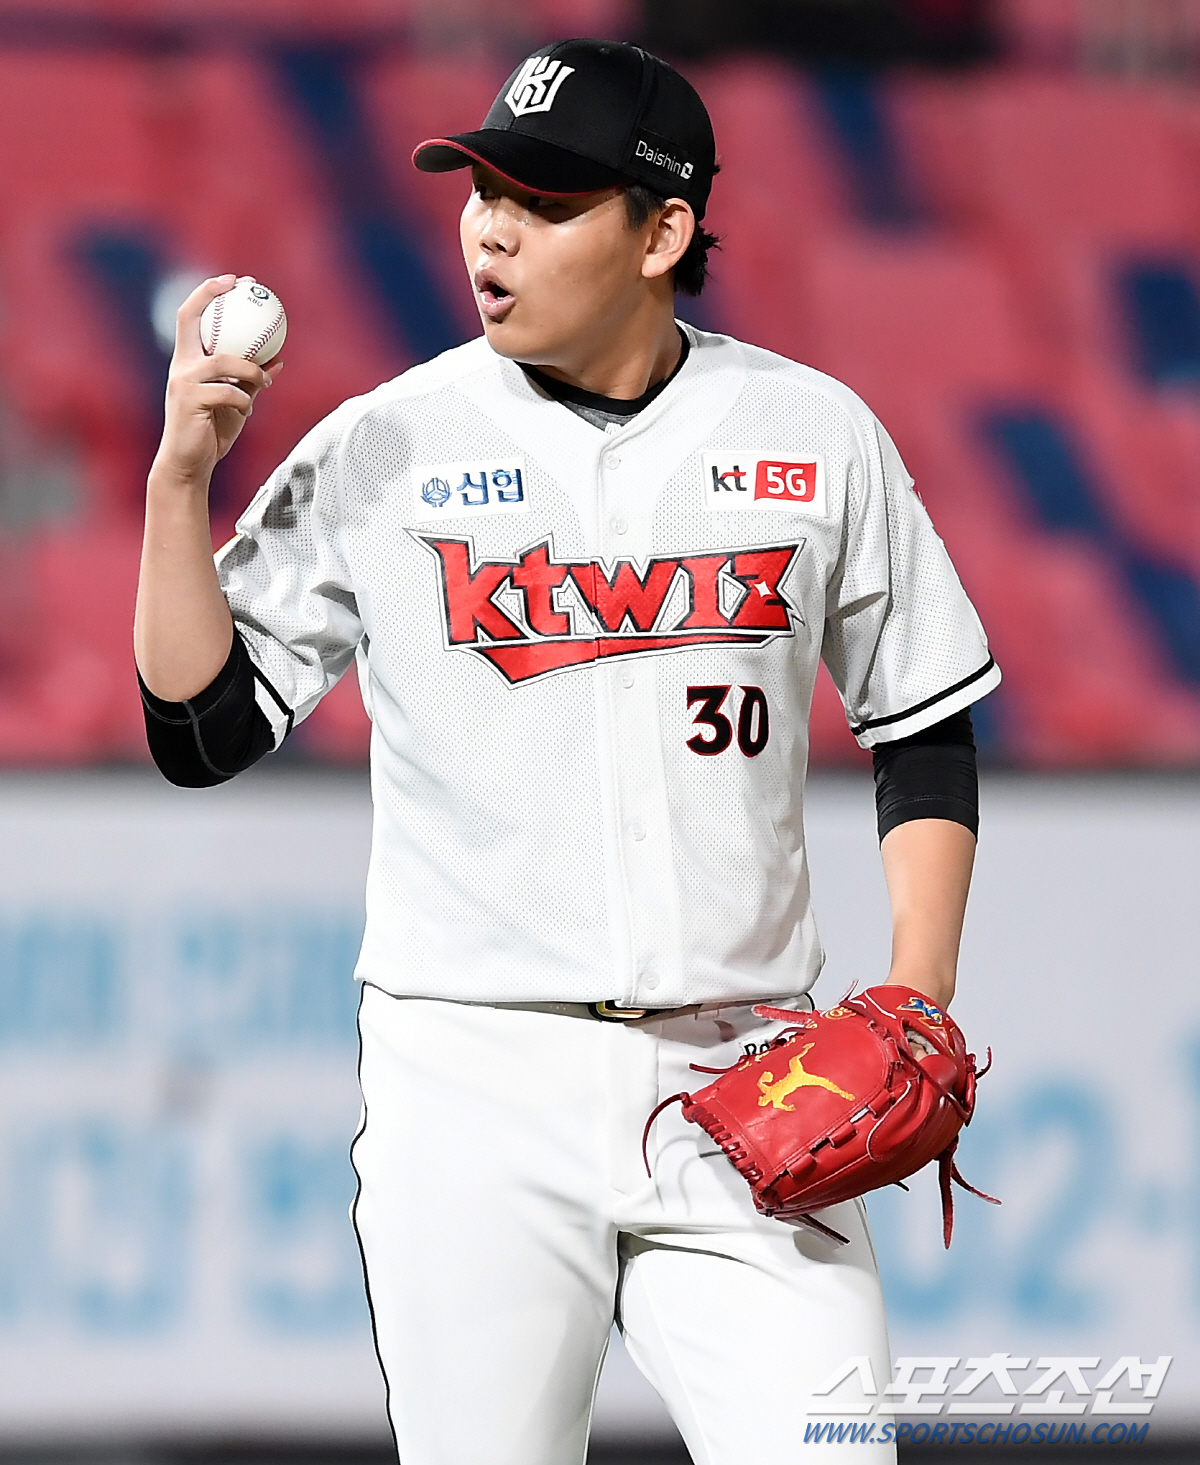 Its a Pitcher like Veteran.Doosan Bears manager Kim Tae-hyung did not slow down the boundary against the Rookie 0th place Mini standard to face in the first game.Doosan will start the playoff series with KT Wiz at the Gocheok Sky Dome on the 9th.Doosan is currently the best paced Chris Flexen to start in the first leg, and KT will be the Mini standard.KT coach Lee Kang-chul decided to put the Mini standard first, not Audrey Samer Despayne, after deep consideration, because he showed such a good appearance before Doosan.High school graduate Mini Standard scored a debut victory against Doosan at the start of the season.Doosan has been good at 6Kyonggi this season and has won 3-1 with an Earned run average of 2.51.The first game against Plexen, who is in the best condition, and Mini Standard, who was strong against Doosan, is Kyonggi, which must be caught by both teams.The first game is of course important, and there is a lot of difference between winning and not entering the first game, said Doosan Kim Tae-hyung. Mini standard was okay with us during the season.I think I saw Data over there and made a first start, but I have to attack it. Doosan had also faced high school graduate rookie Lee Min-ho in the first leg of the semi-playoff against the LG Twins.In the match against Lee Min-ho, Doosan, who scored two points in the first inning and then succeeded in reaching the second and third innings.Lee Min-ho had become a losing pitcher with three runs in 313 innings.Both are good pitchers, said Kim Tae-hyung, I think the mini standard is better than the control of the strength or technique.Lee Min-ho looks like a freshly graduated loser from high school, Mini standard looks like Veteran, quick and strong control.I think I know when to run and when to stick. To make the playoff series easy for Doosan to unravel, he must bring down the Newman like Veteran Mini standard this time to perfection.Doosan, who has a big Kyonggi experience, will play against Mini standard, and Flexen will throw well this time.